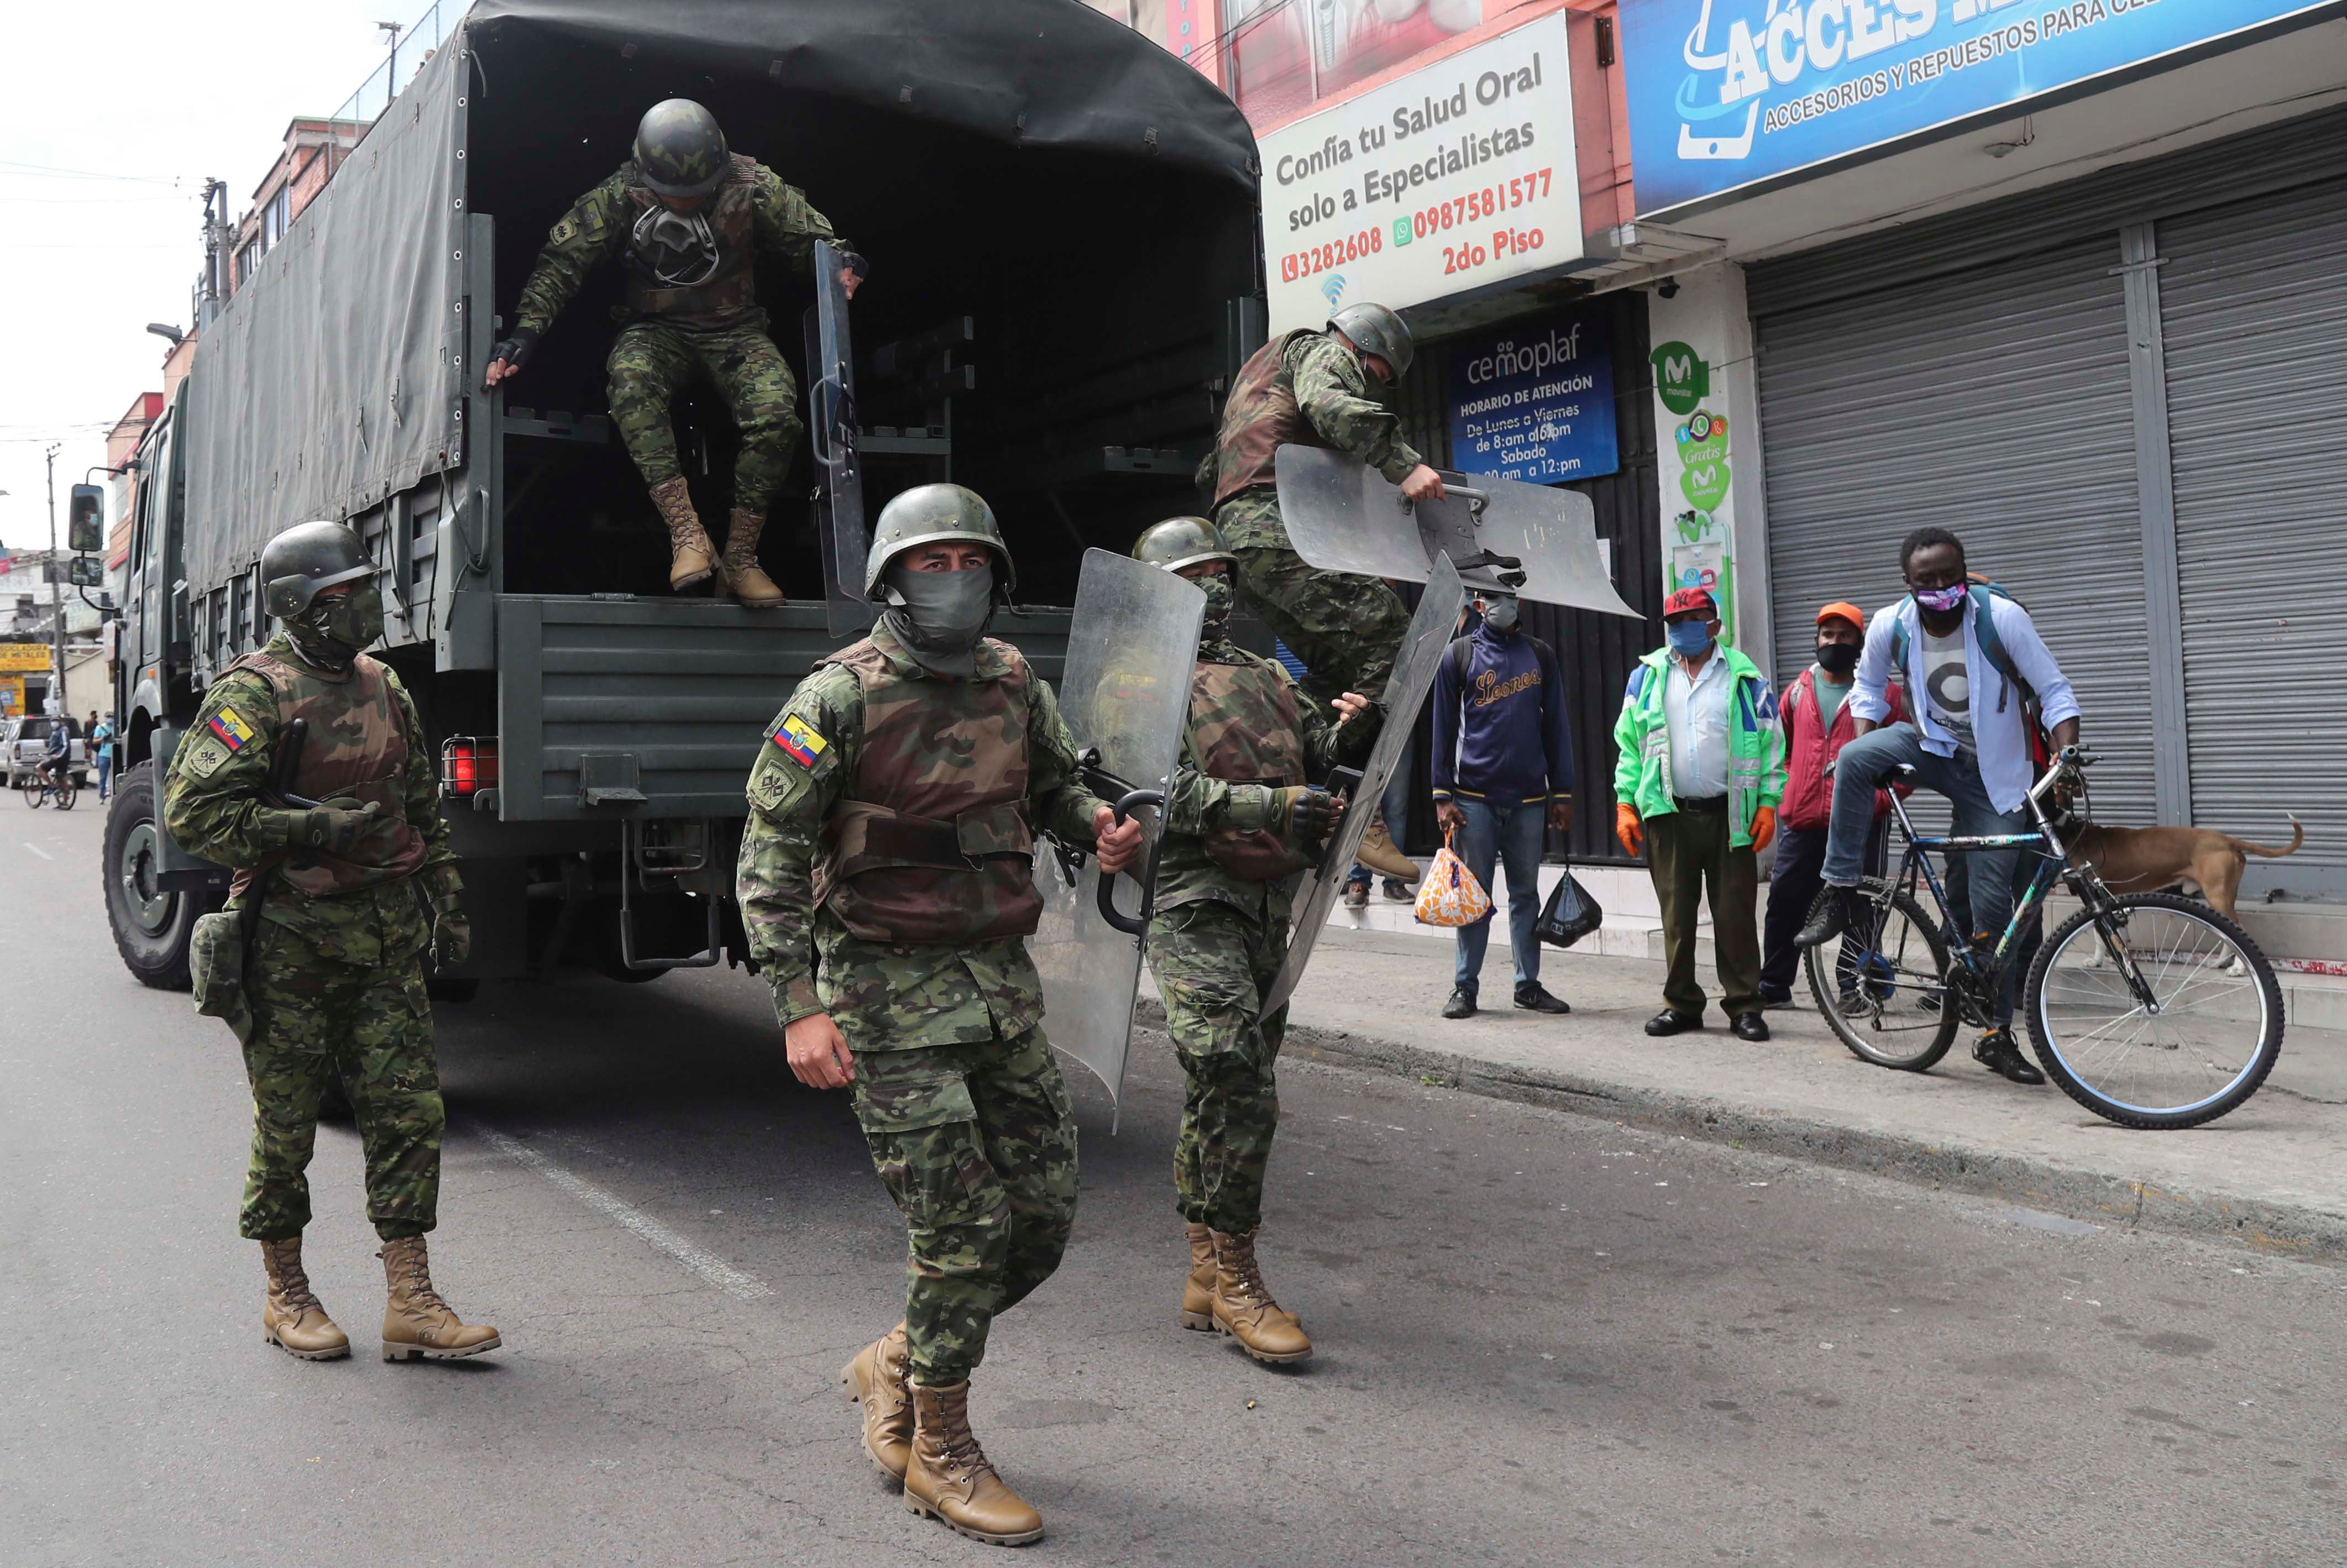 Soldiers in riot gear arrive to reinforce authorities after street merchants protested the seizure of their merchandise by the municipal police of Quito, Ecuador, Thursday, May 21, 2020.